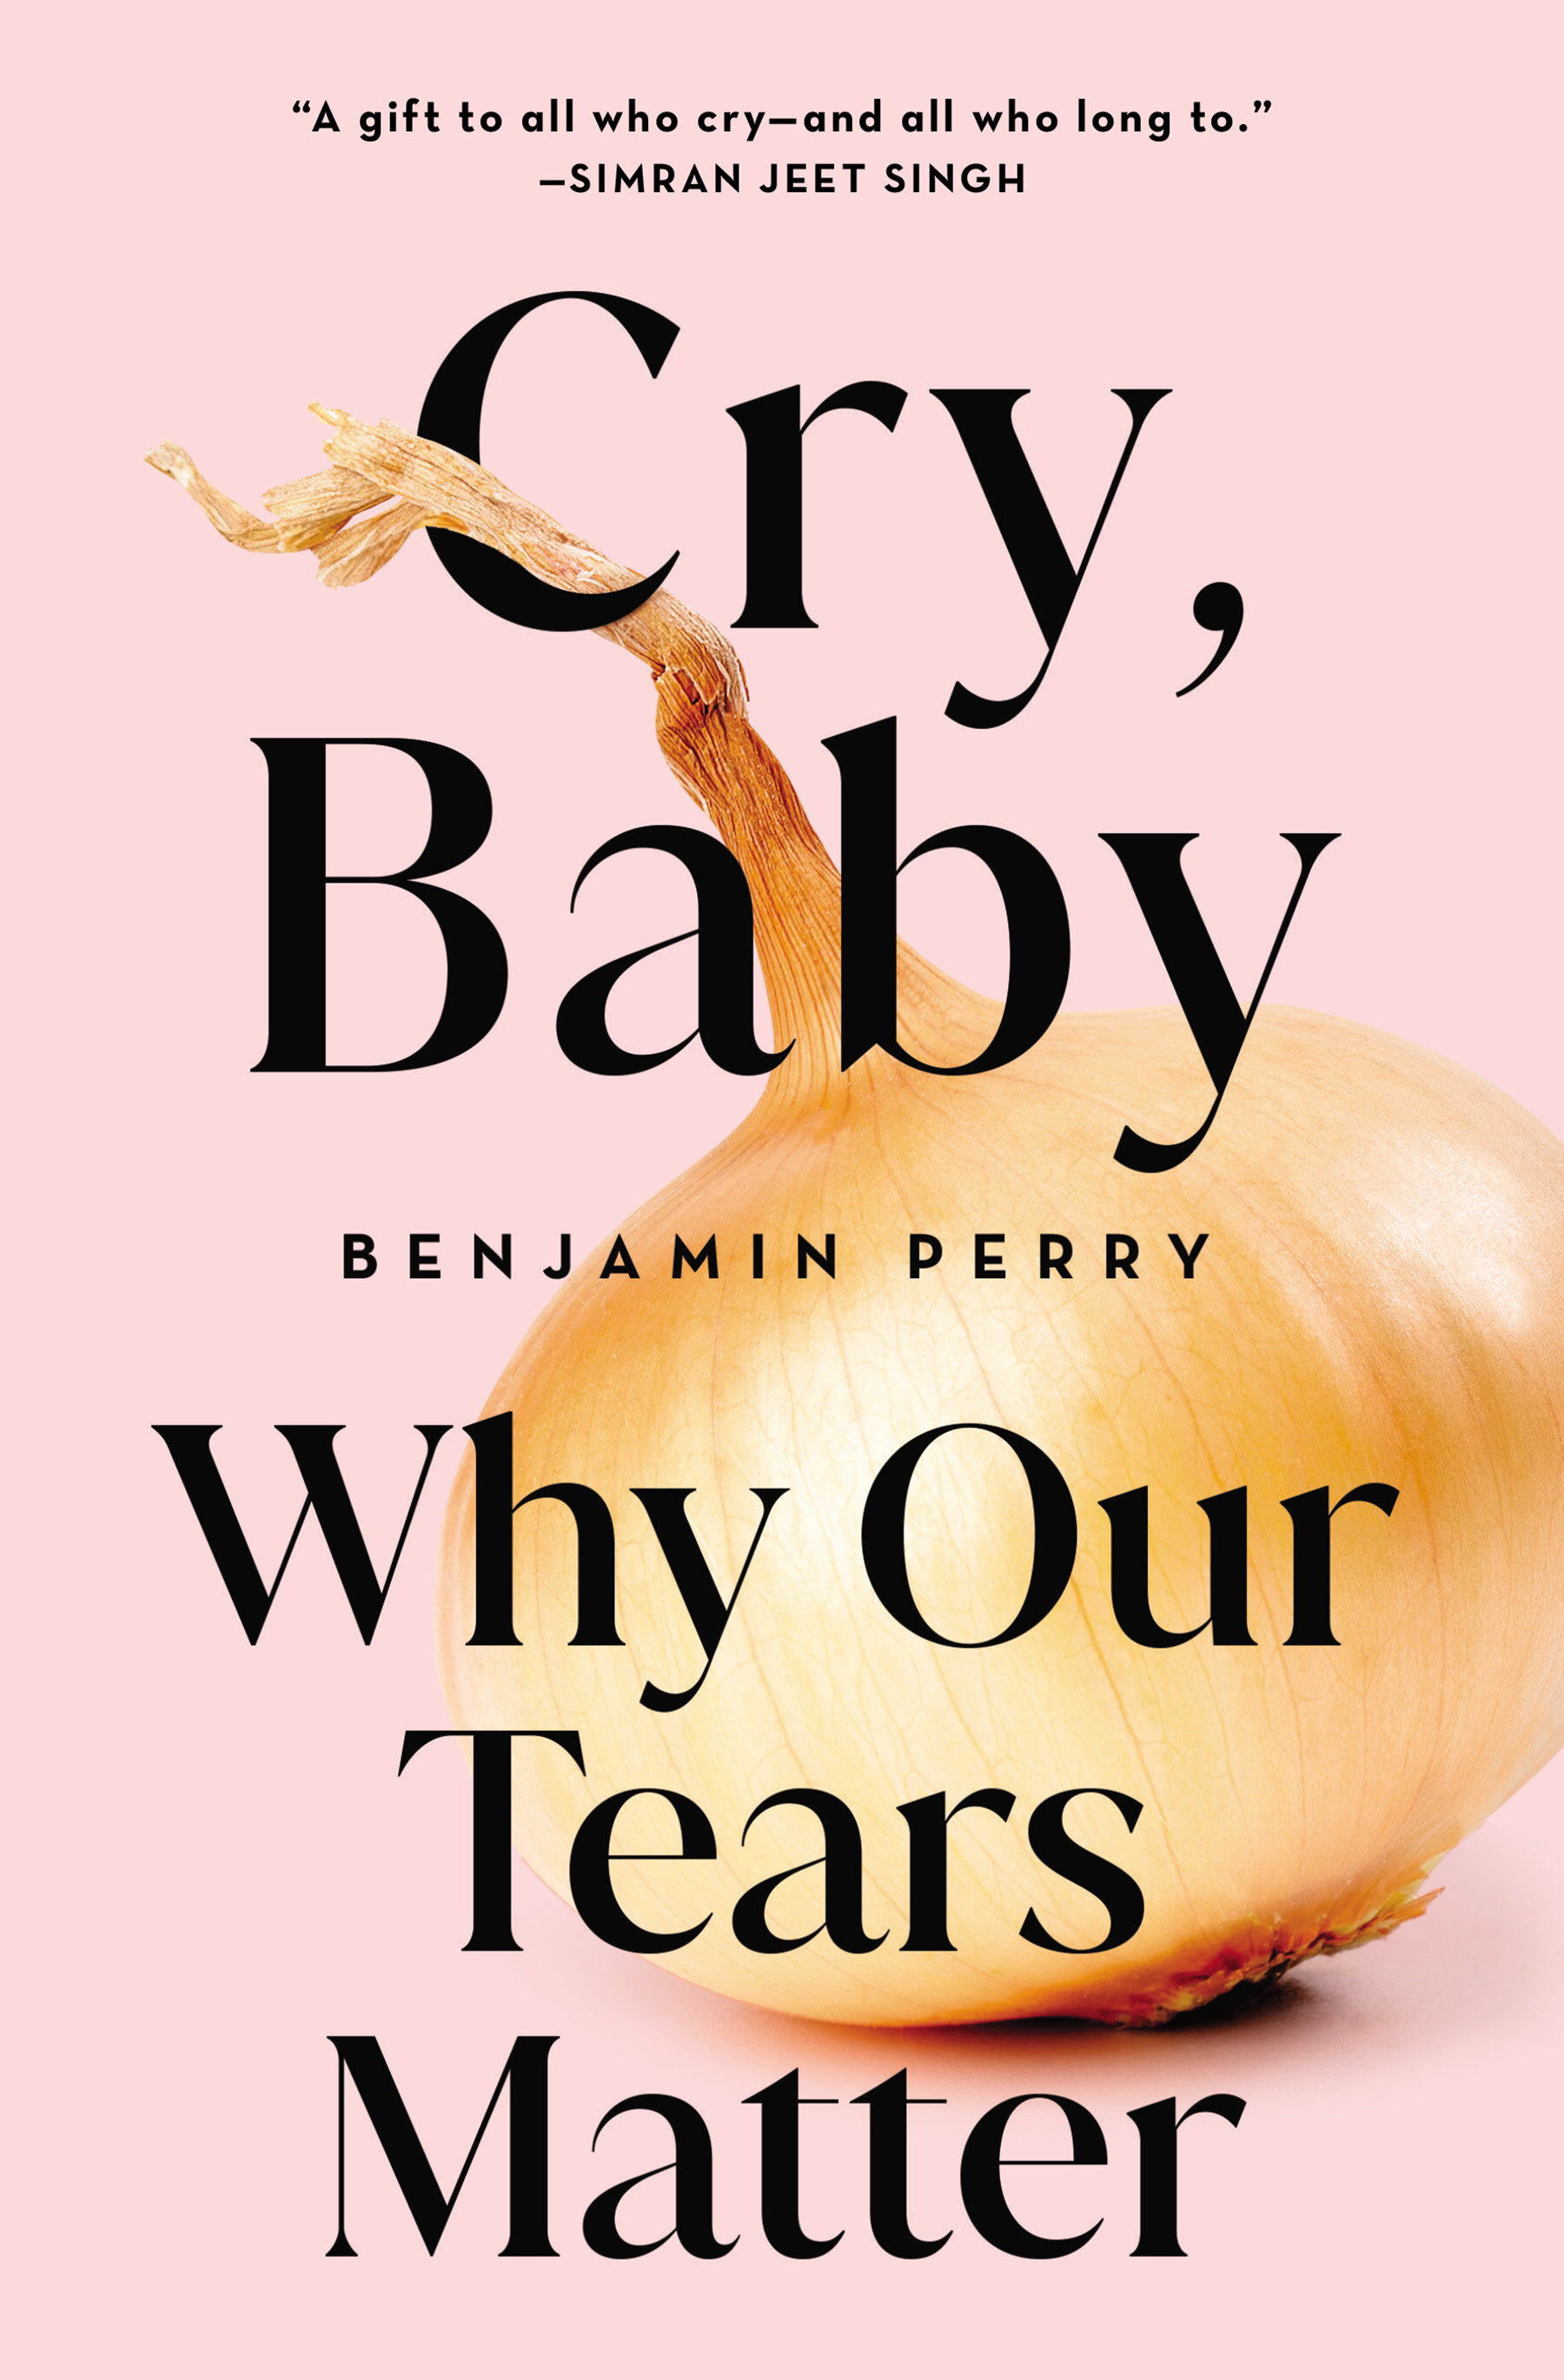 Cry, Baby: Why Our Tears Matter